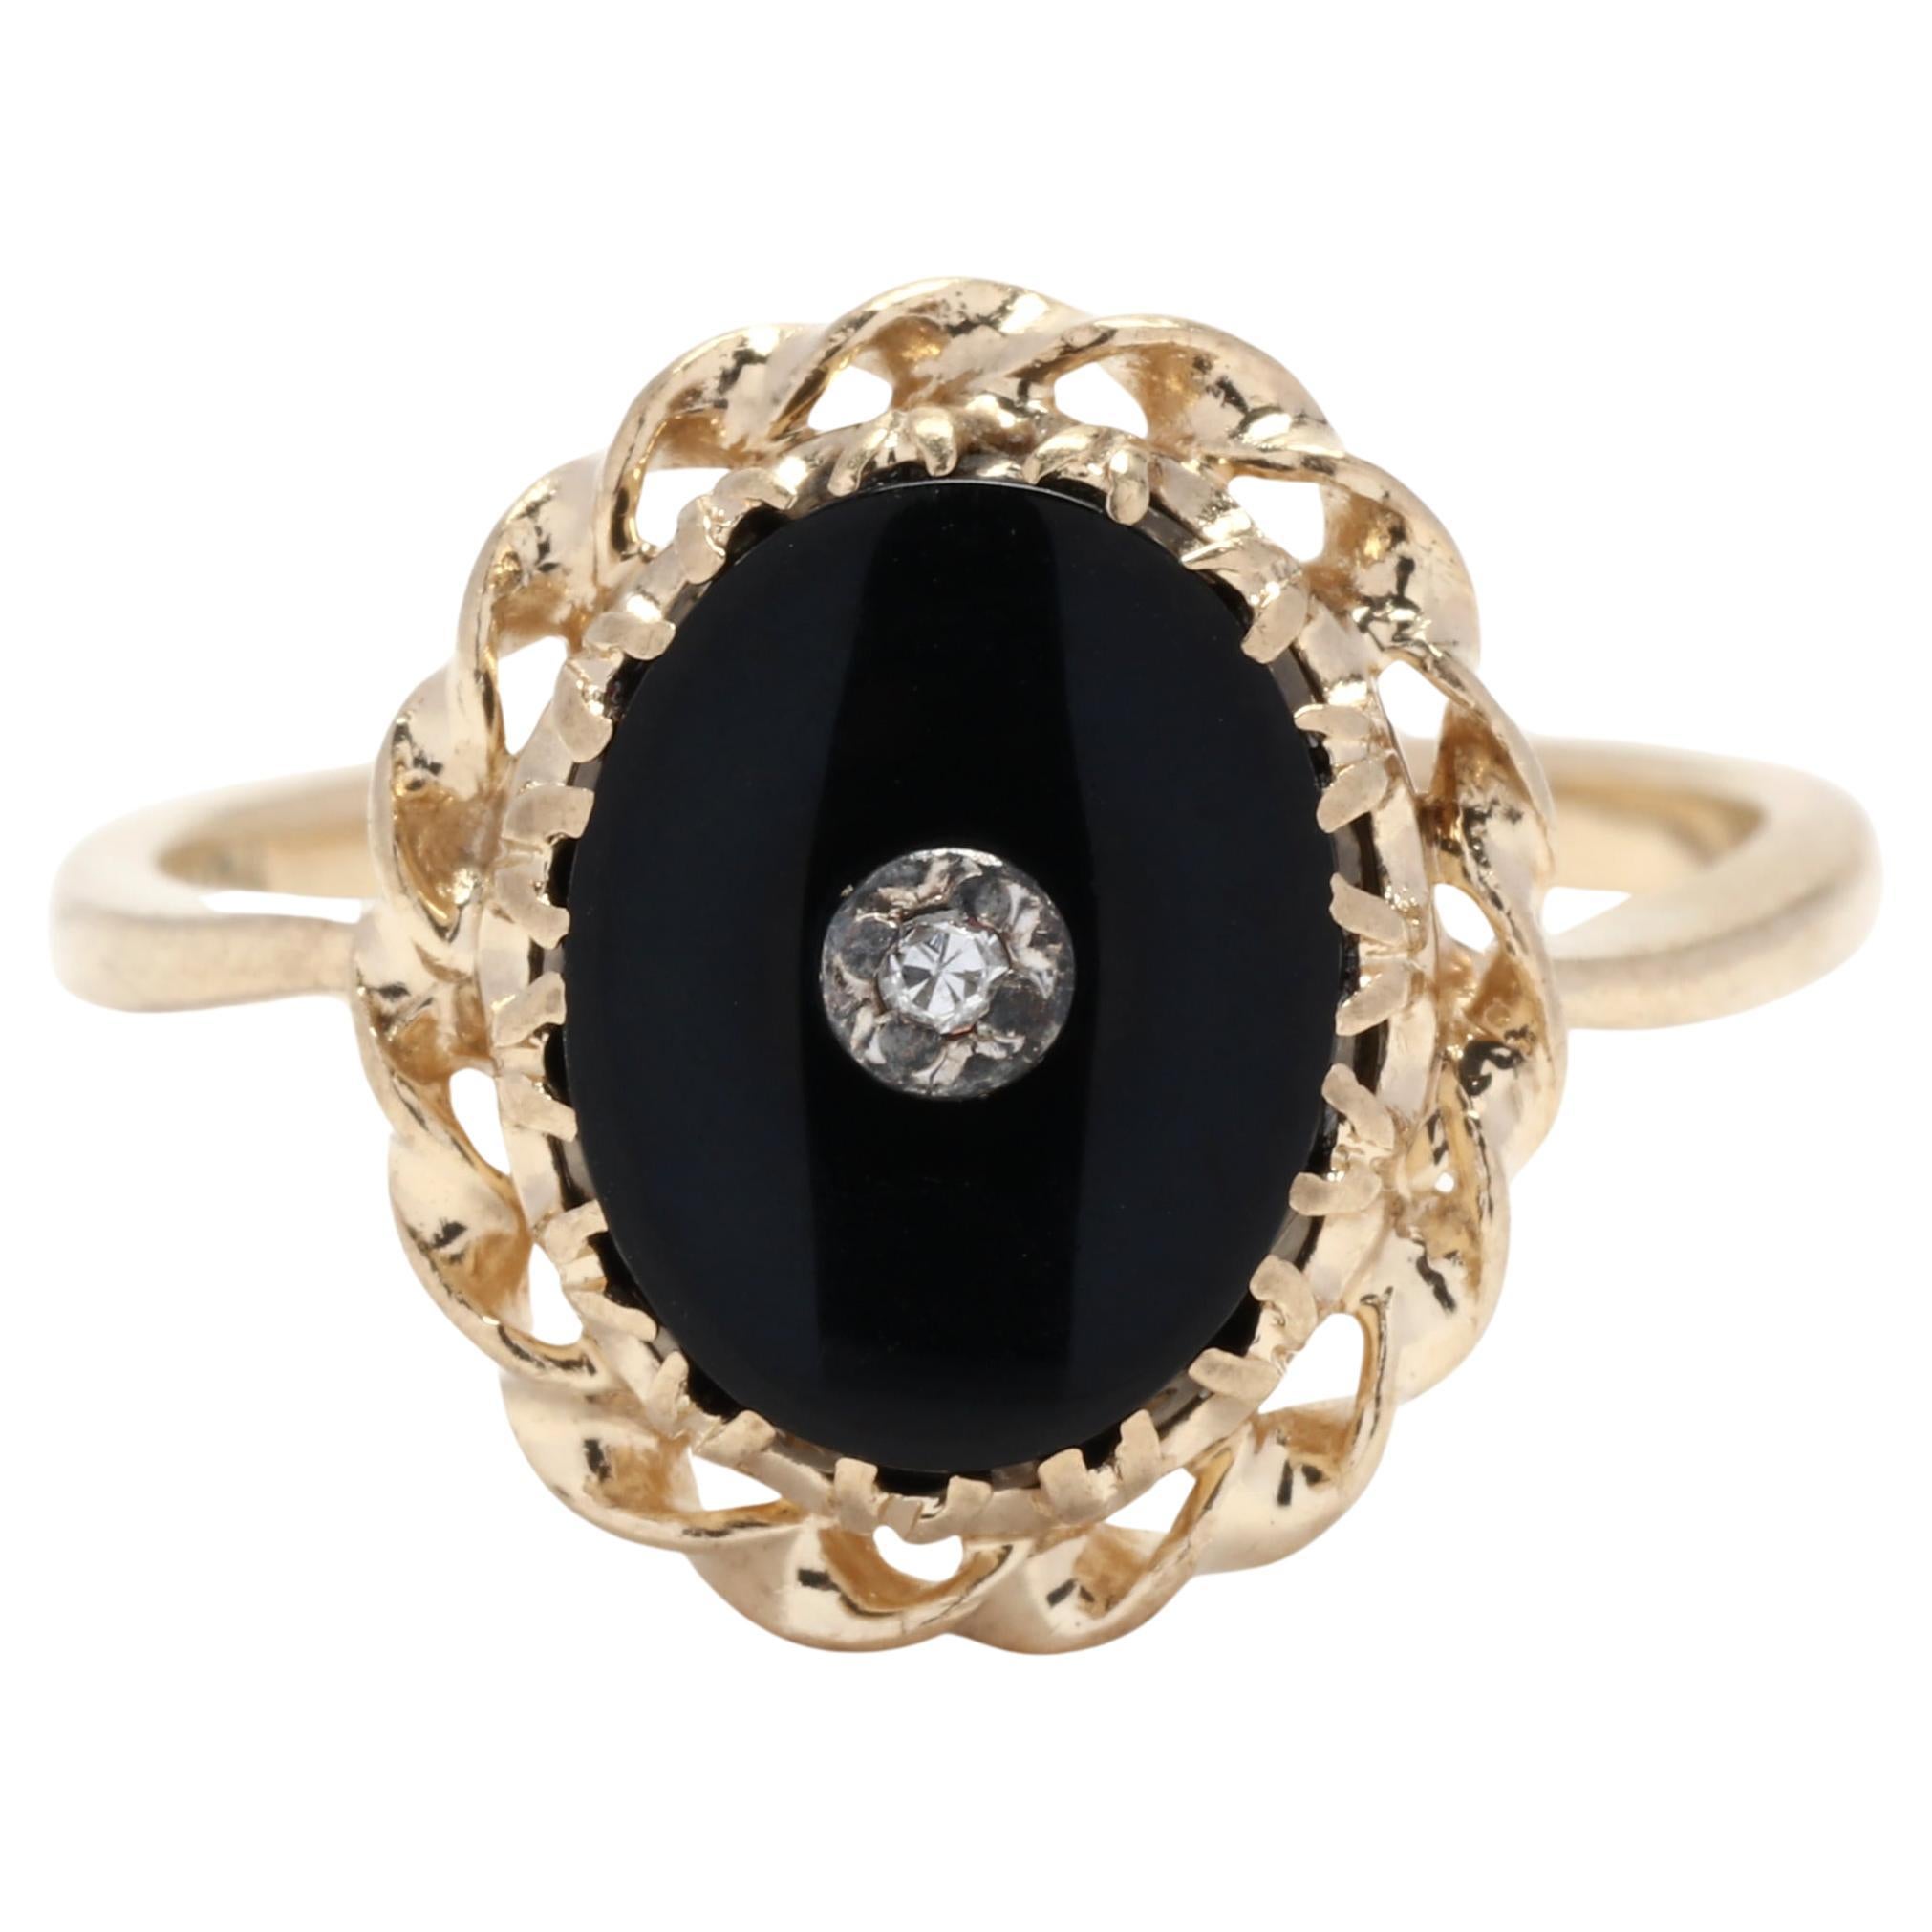 Diamond and Black Onyx Oval Ring, 10k Yellow Gold, Ring Size 5.5, Fancy Ring  For Sale